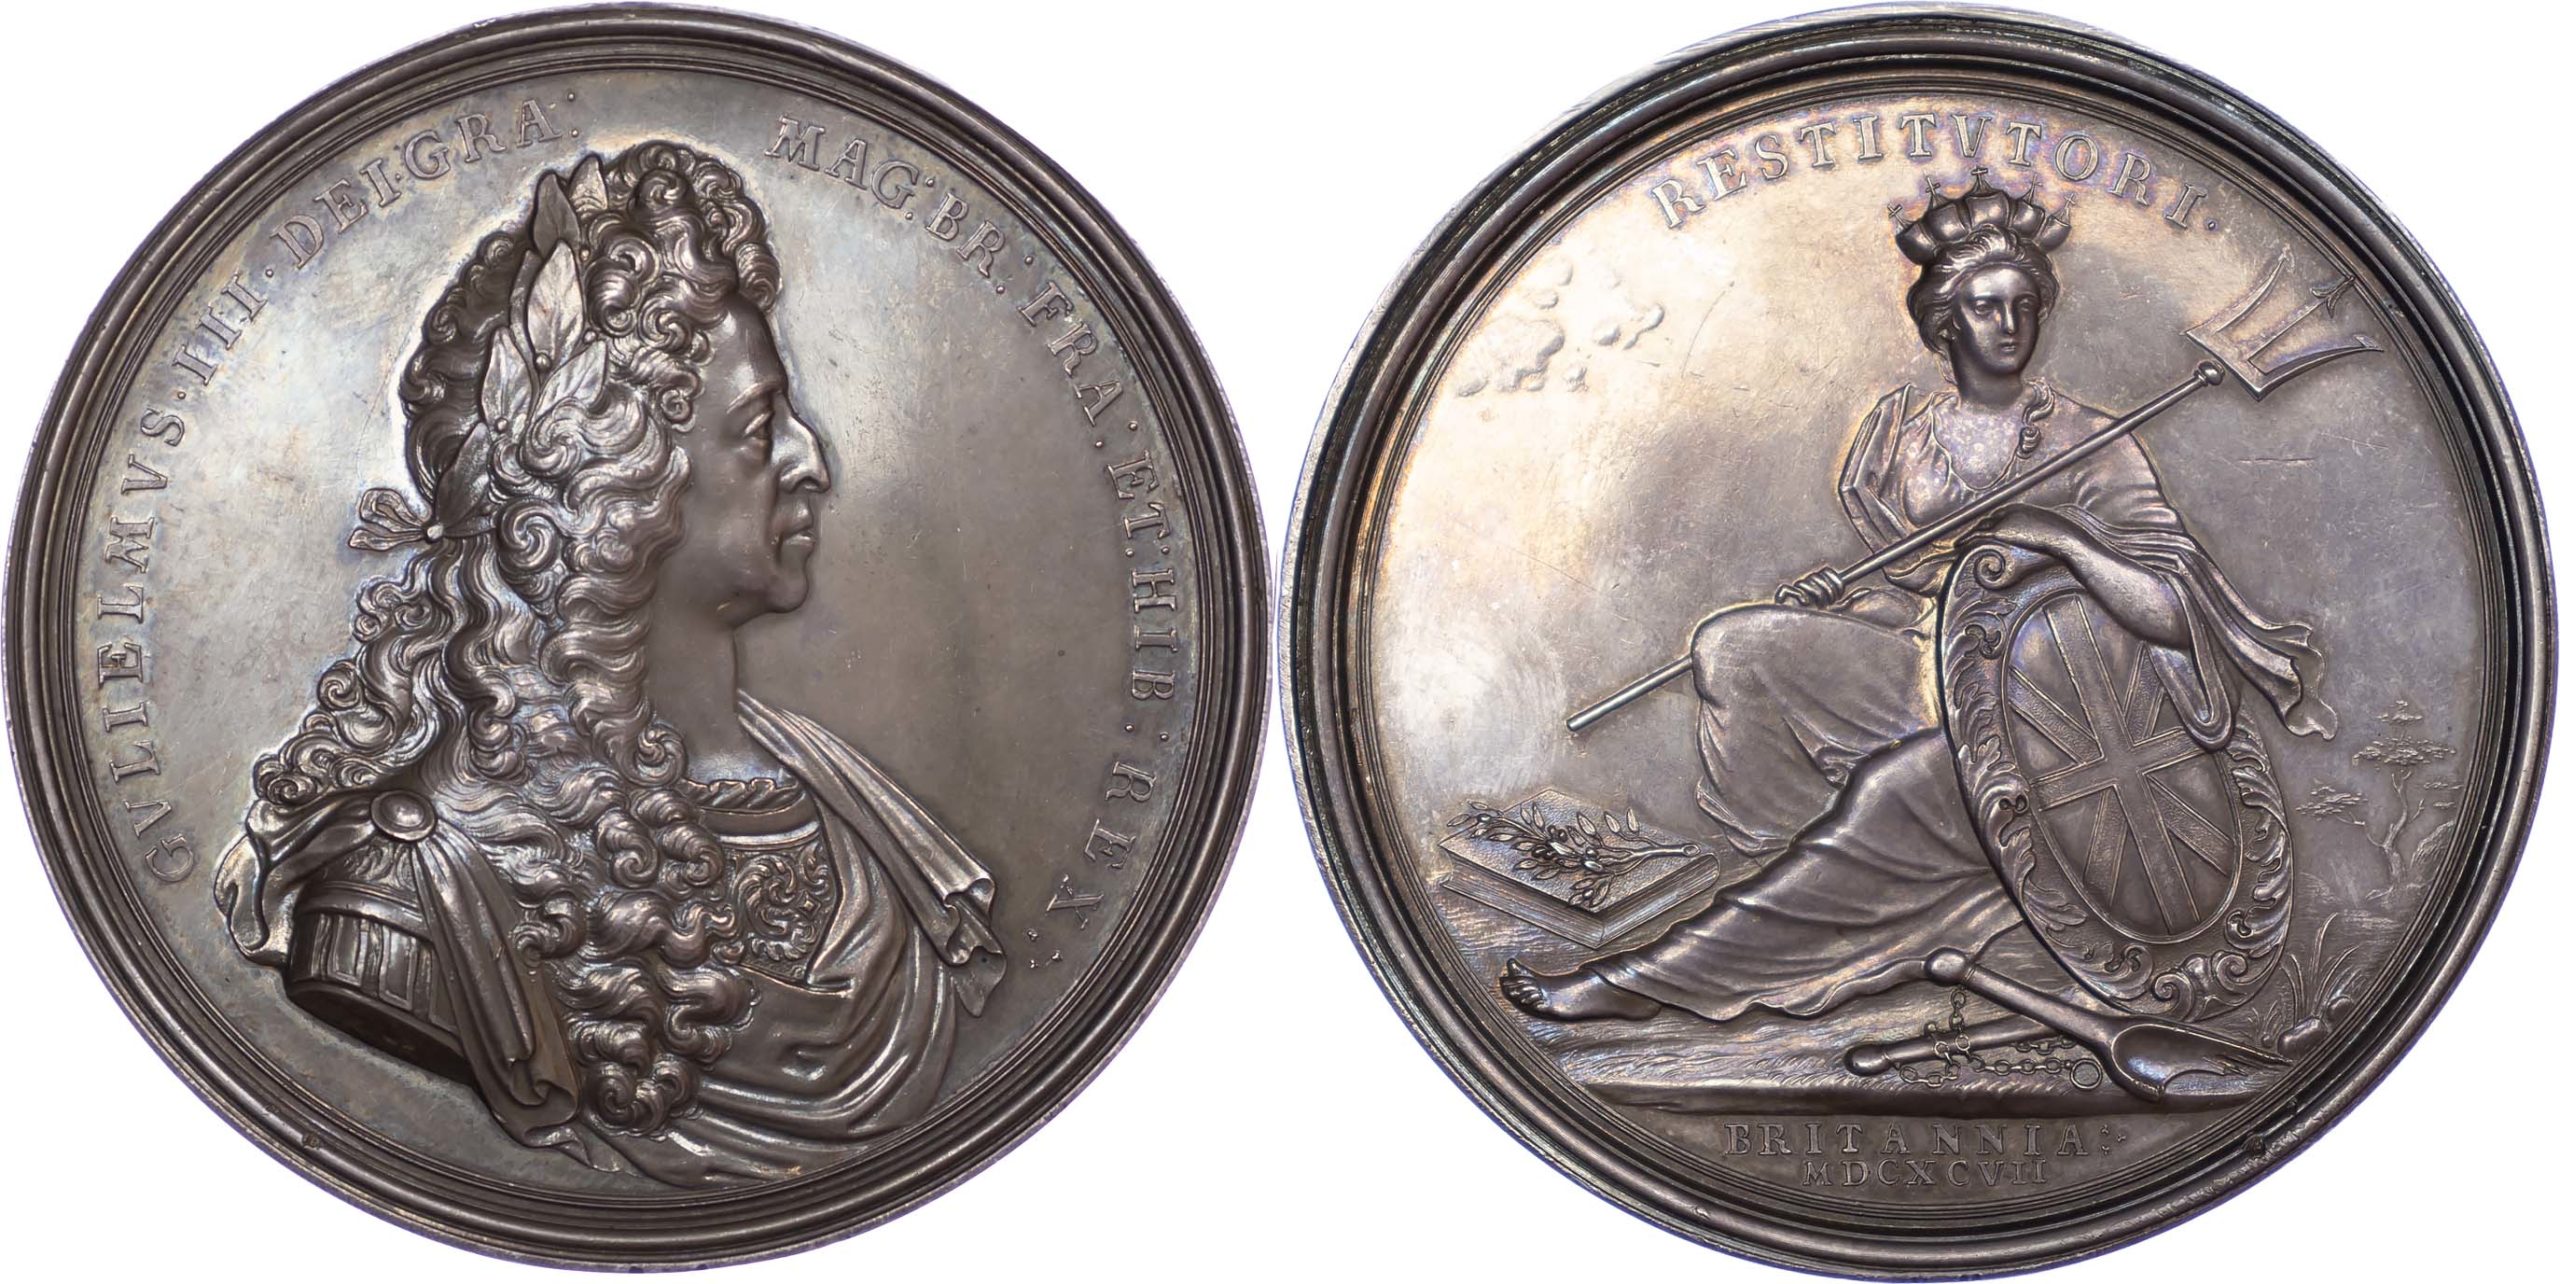 William III, State of Britain (following the Peace of Ryswick) 1697, Silver medal